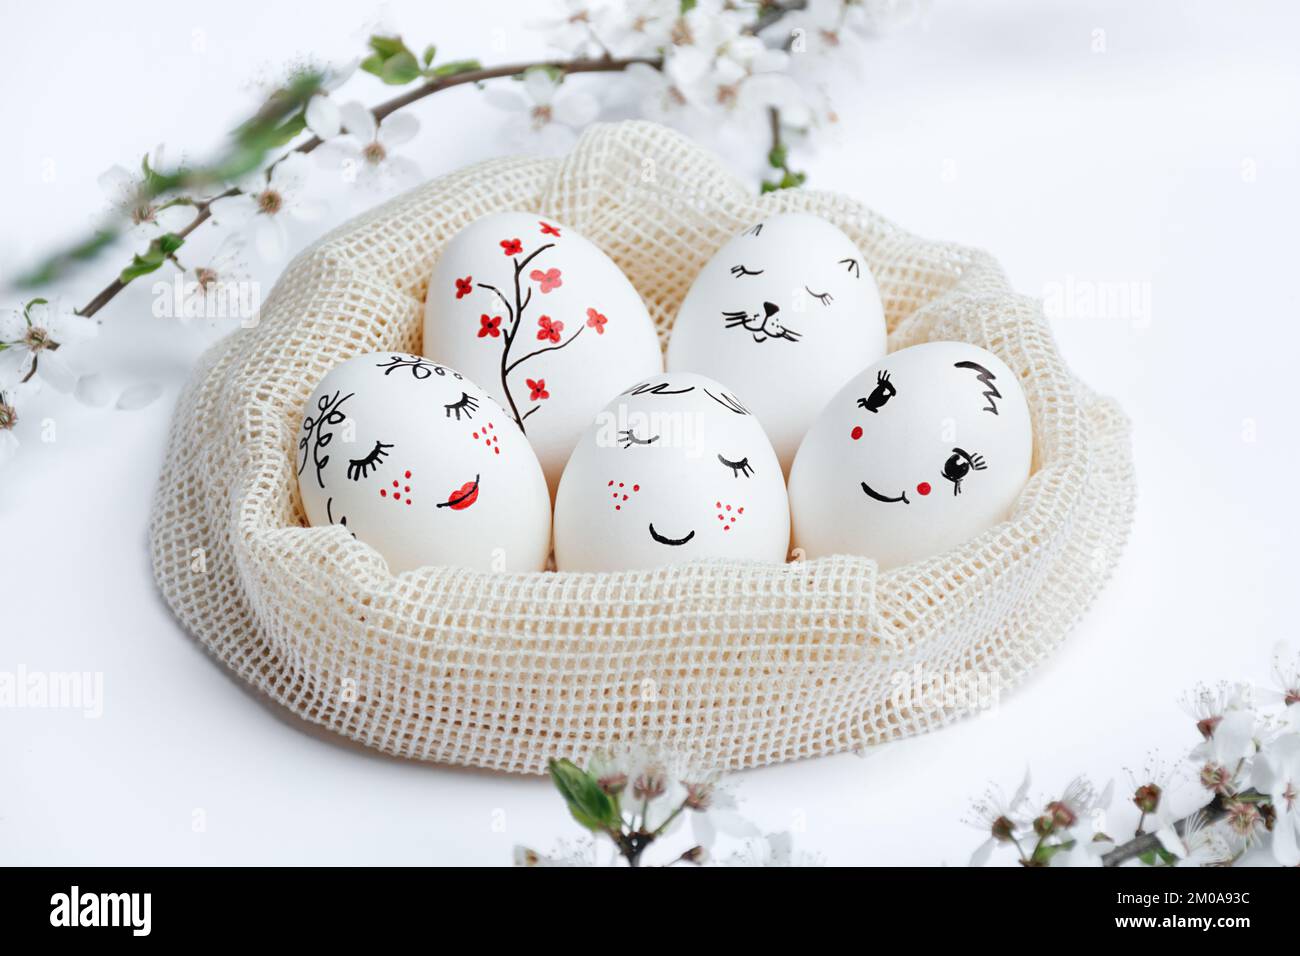 Defocused focus on foreground flowering branch. Easter delicately painted eggs in eco-friendly mesh bag on white table. Funny faces, flowers, viburnum are painted on eggs. Handmade workshop Stock Photo